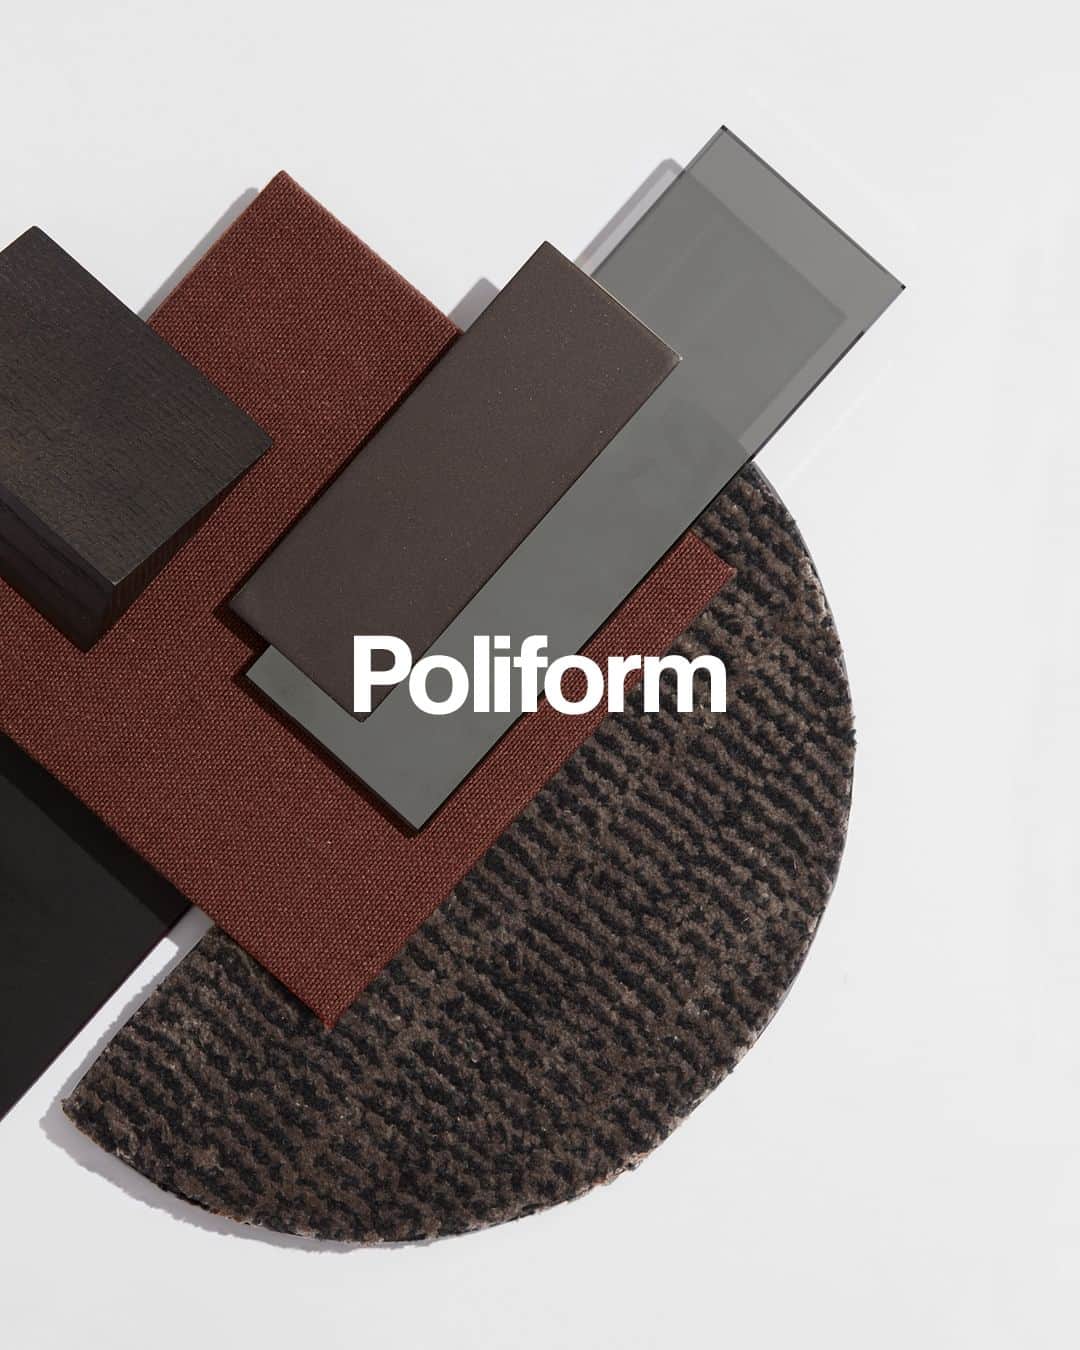 Poliform|Varennaのインスタグラム：「Express your lifestyle with Poliform and the vast selection of materials, textiles and finishes available to make a house your home. Discover Poliform style on poliform.com. #poliform #design #madeinitaly #designinspiration #poliforminspiration #materials #designtrends #furniturematerials #poliformstyle #home #homedesign」